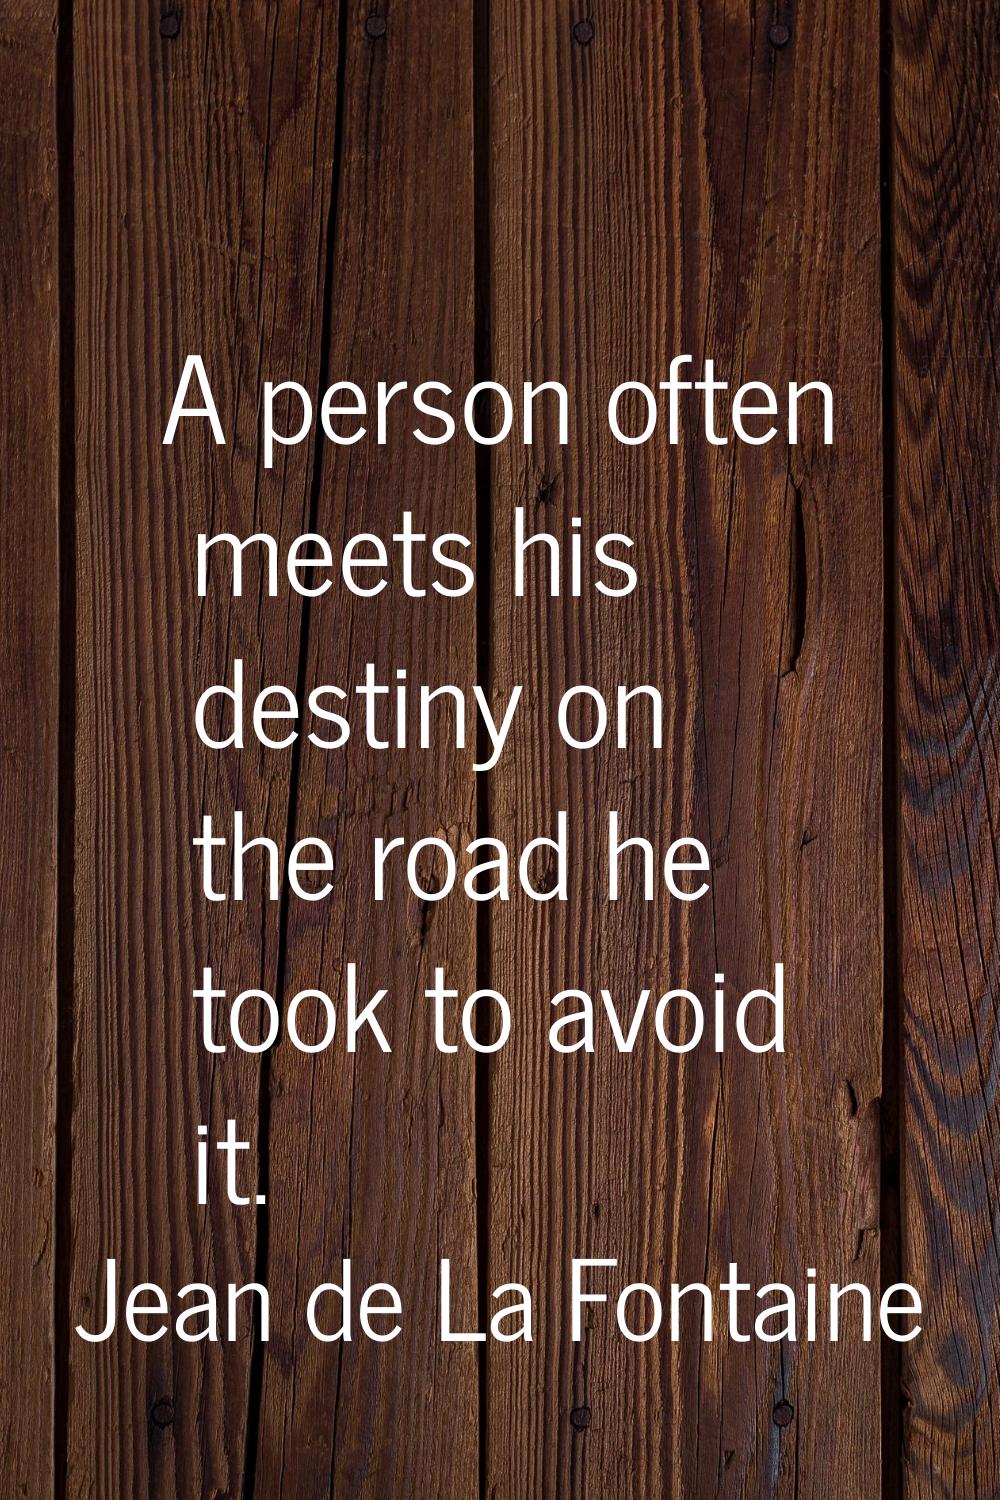 A person often meets his destiny on the road he took to avoid it.